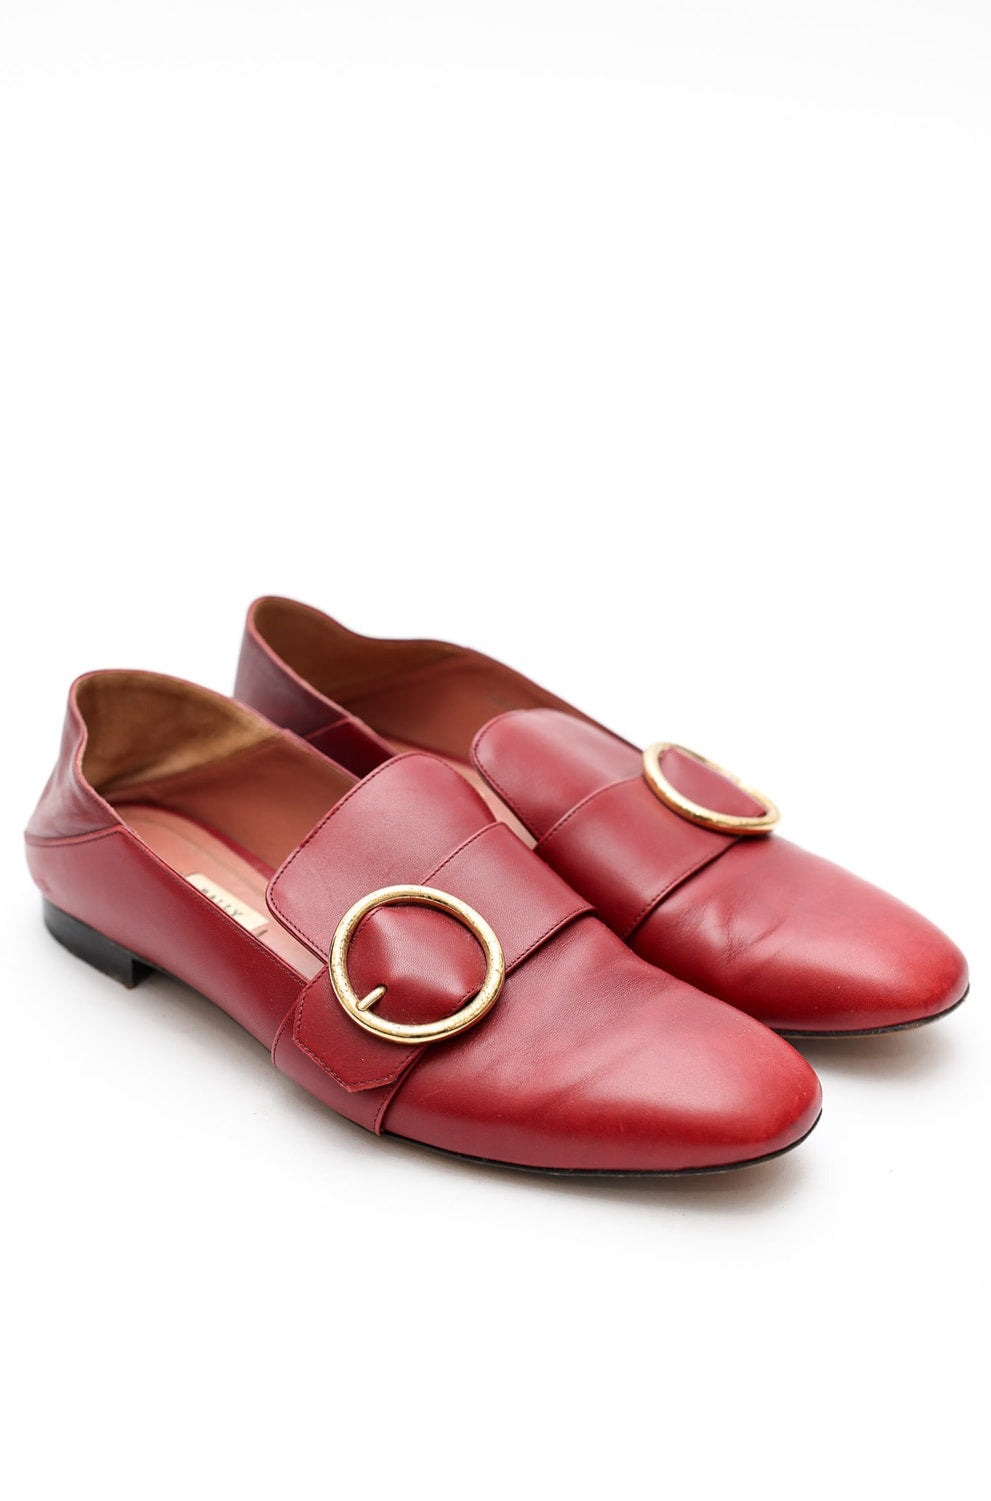 Bally Red Leather Loafer/Mule